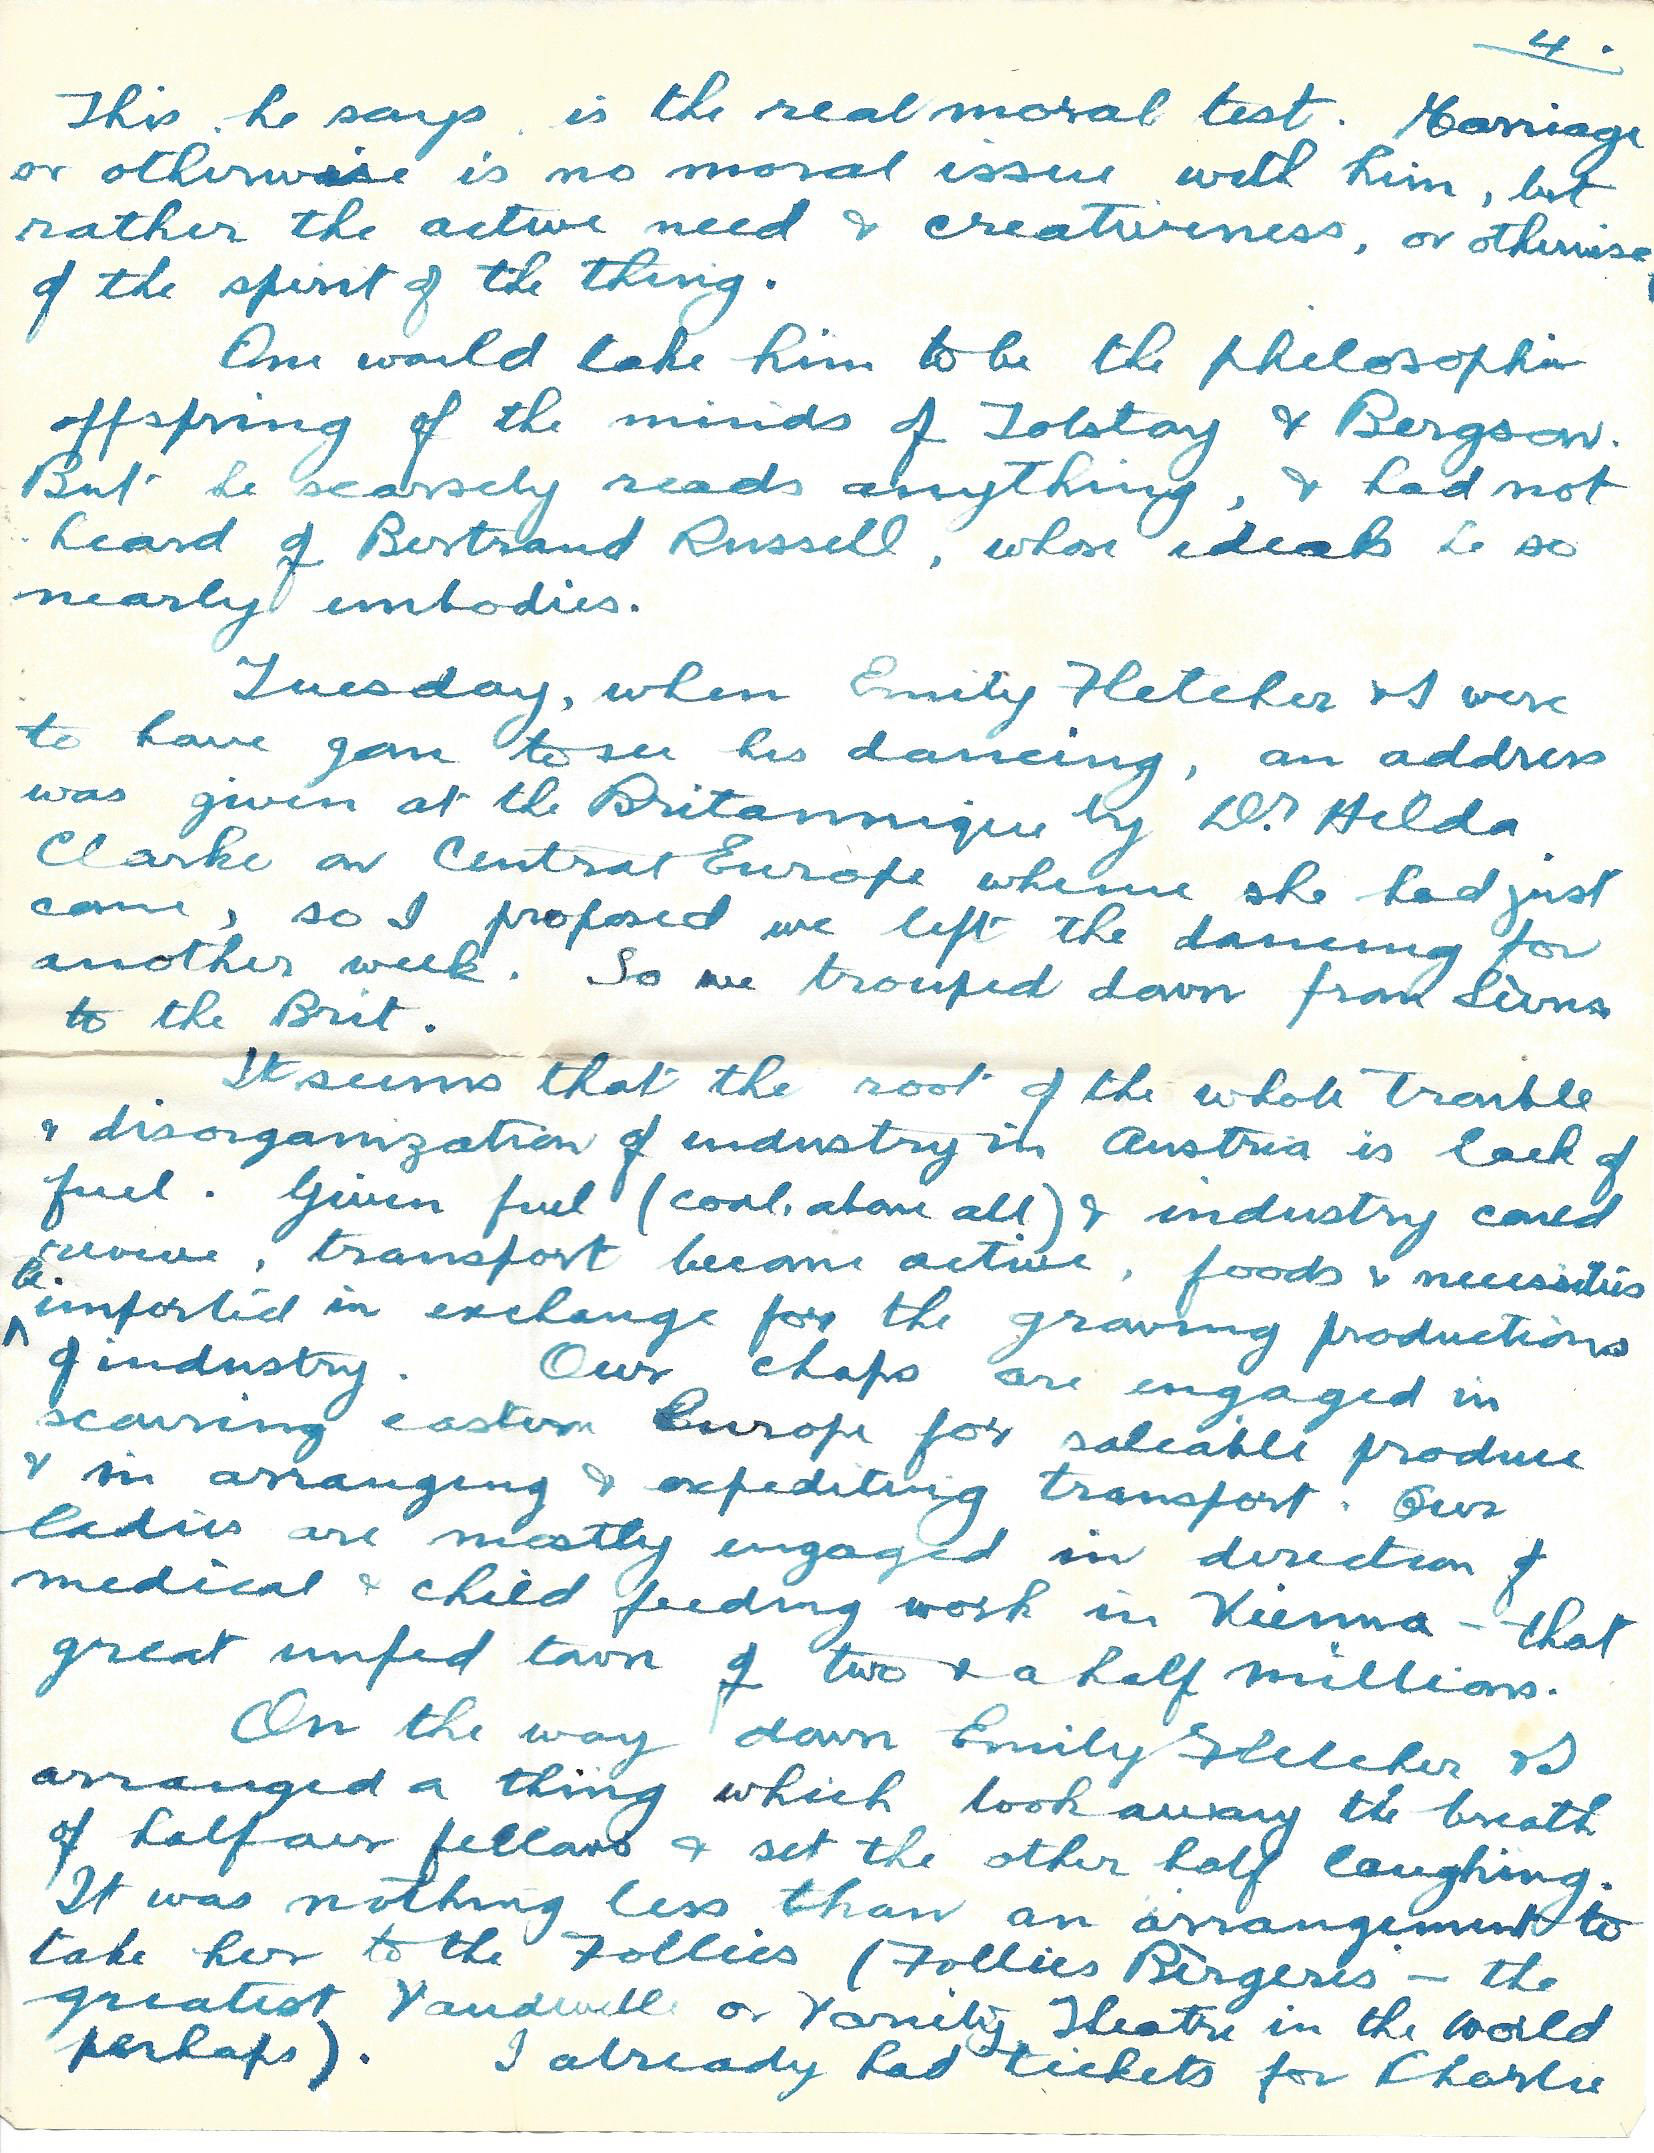 1919-12-13 Page 4 letter by Donald Bearman